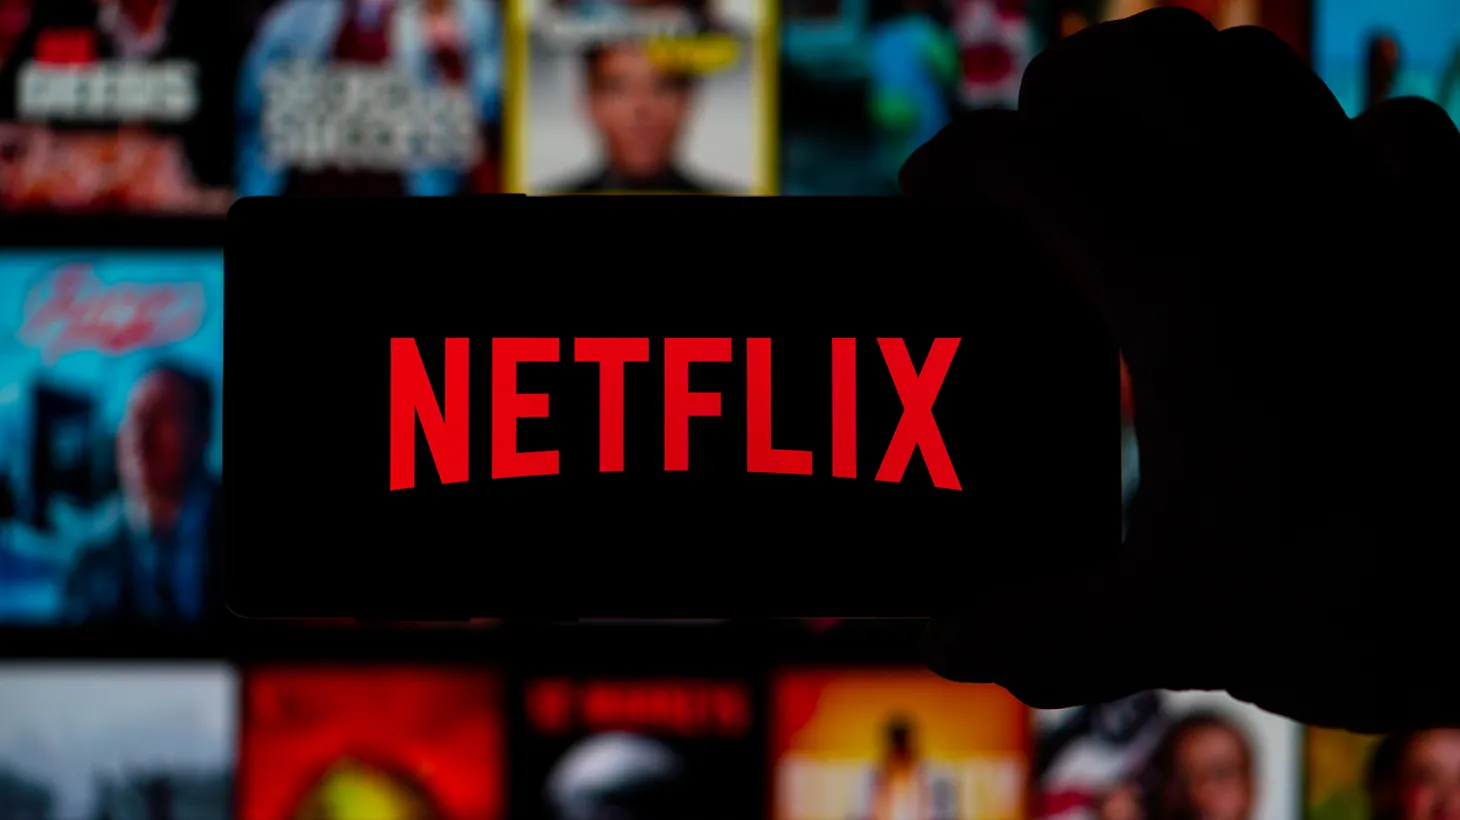 Netflix’s standard plan now costs more than $15 a month for new members. While subscribers may not love this news, Wall Street does because it shows the market power of the streaming giant.